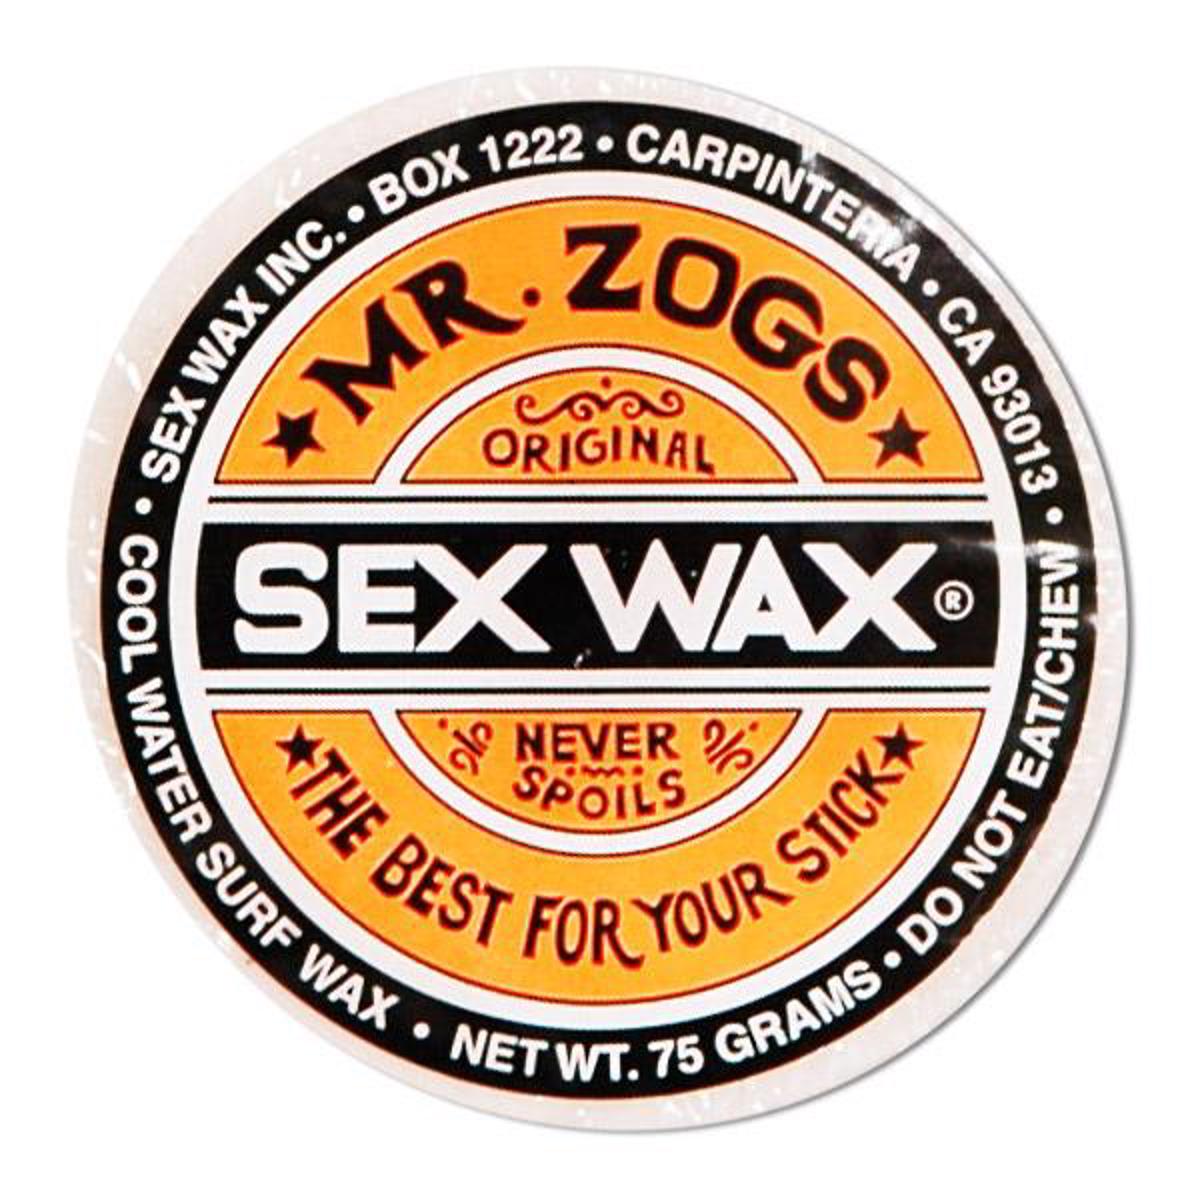 SEX WAX MR ZOGS COLD TO COOL - Accessories - GONG Galaxy